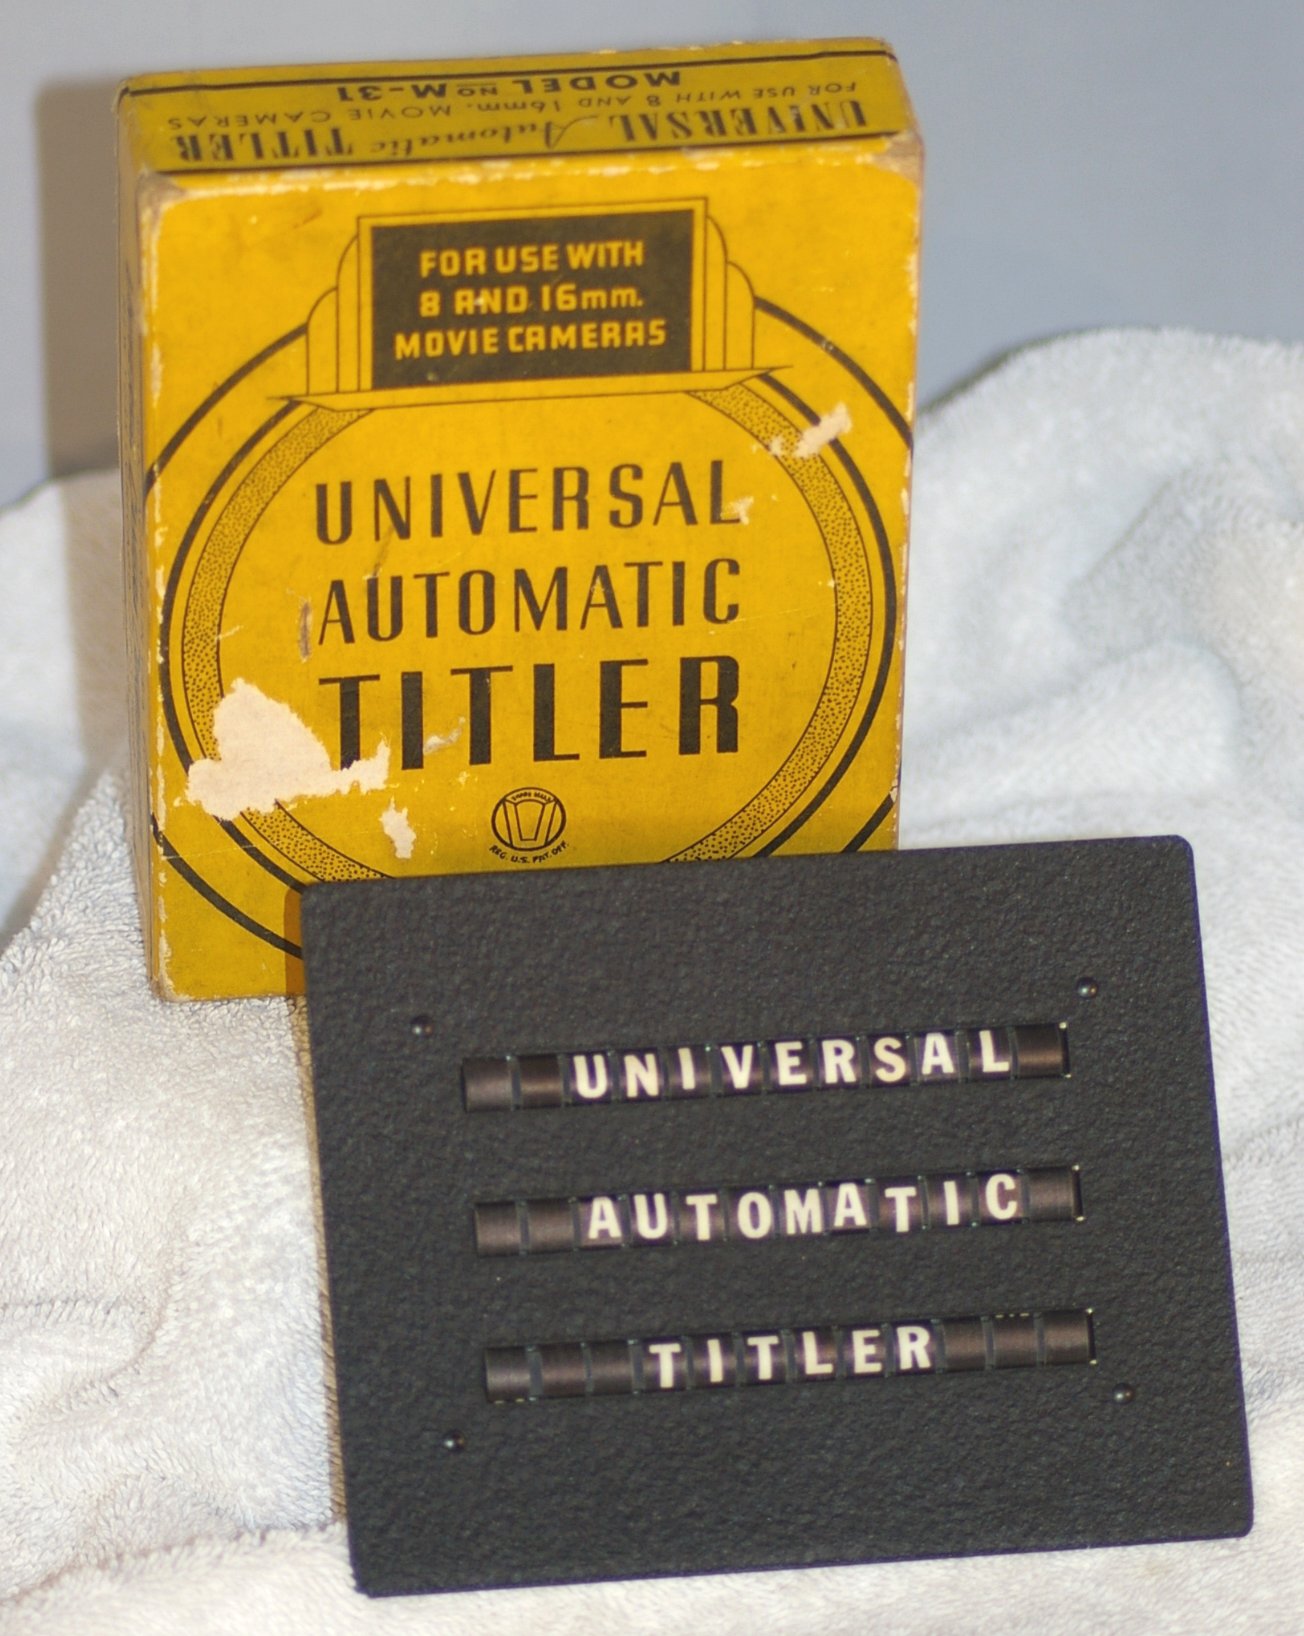 Universal Automatic Titler for 8 and 16mm Movies about 1935